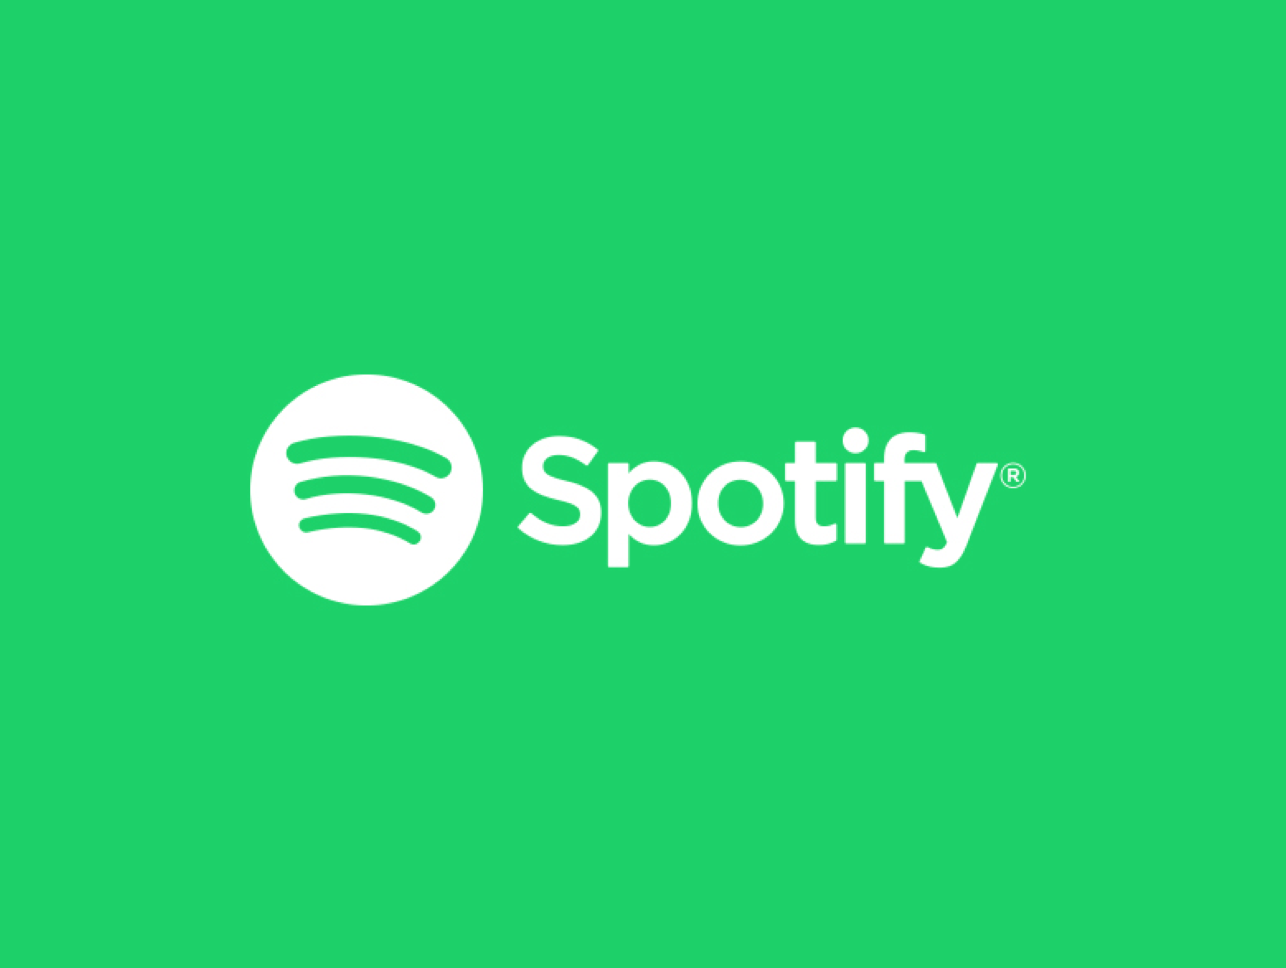 Green Colored Brand Logo - Spotify had no idea how much you'd hate its logo color